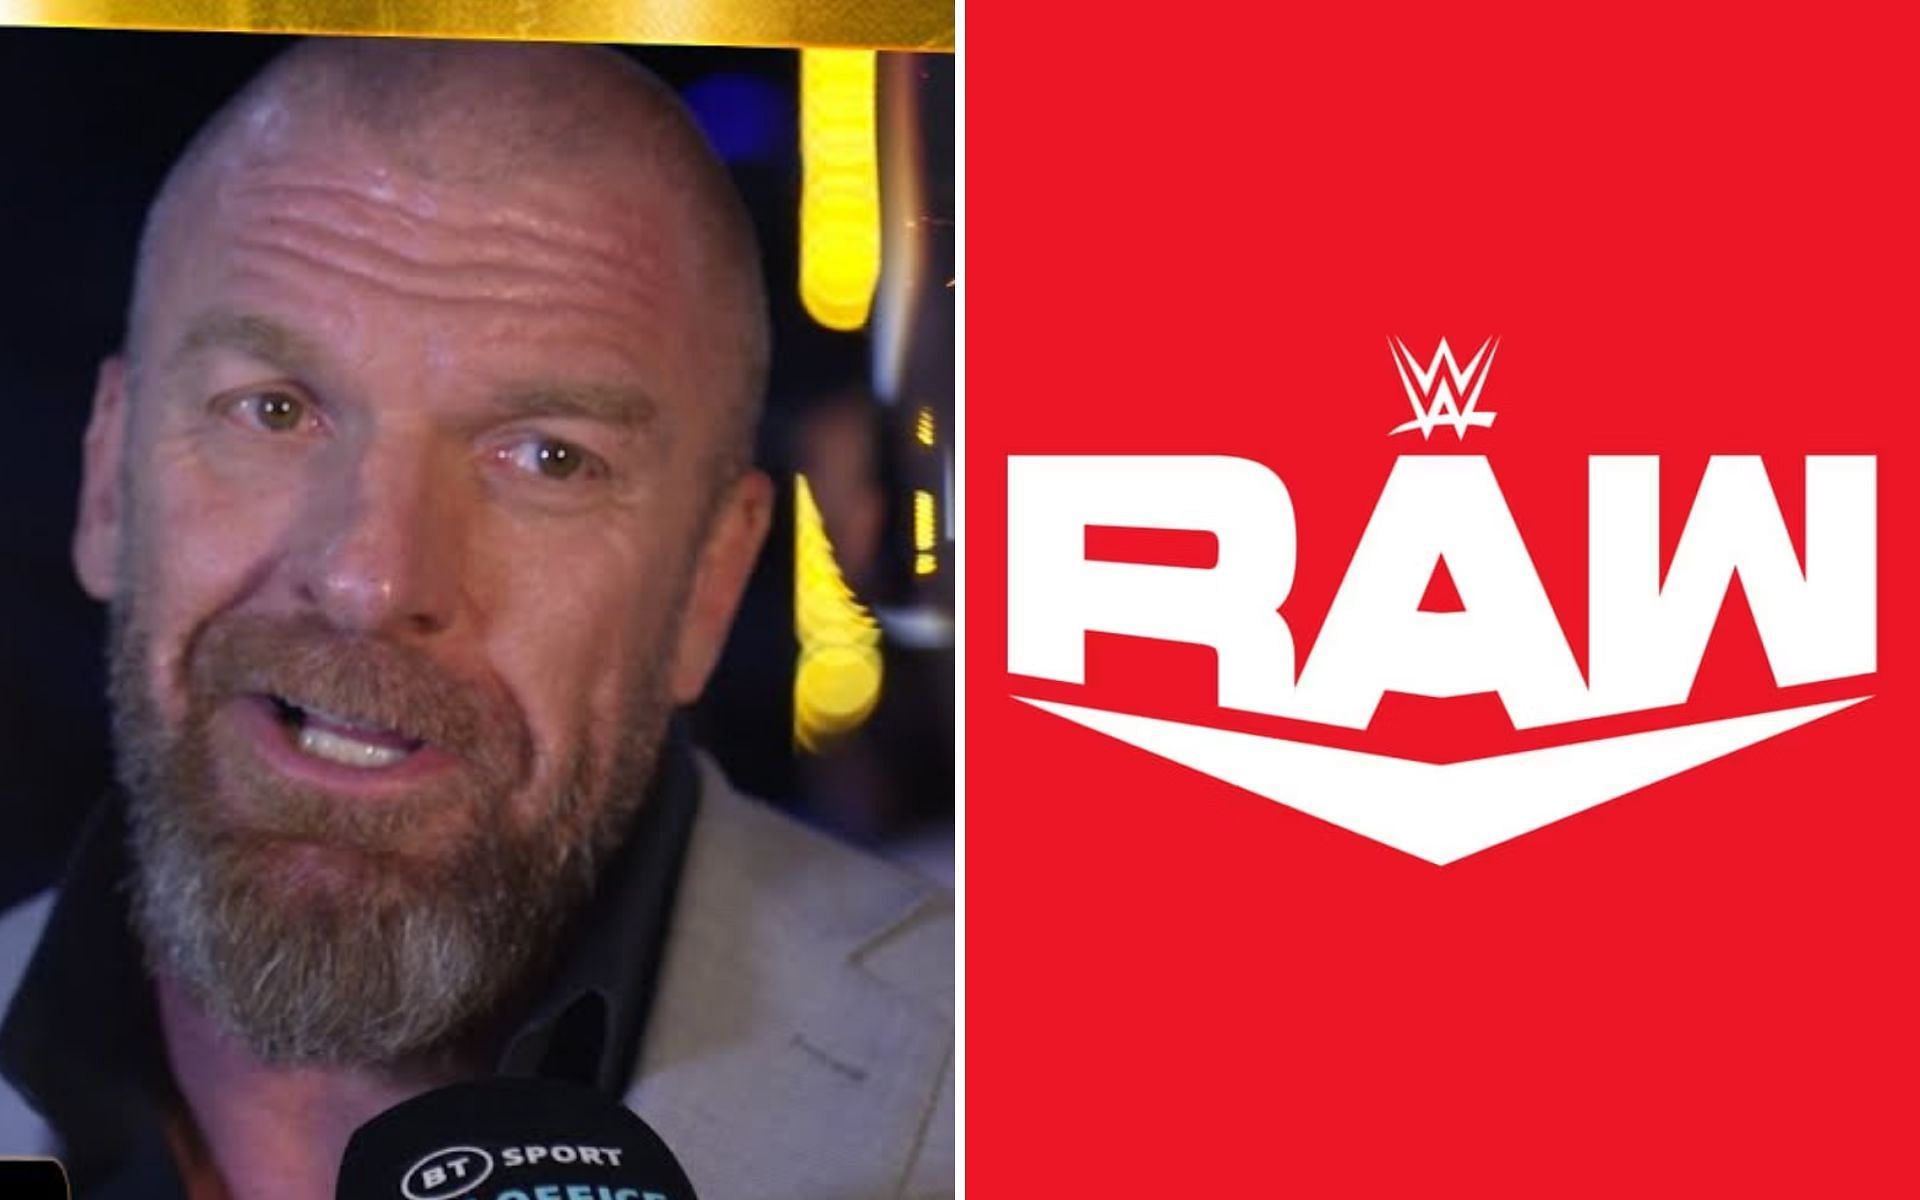 Triple H may not have been interested in continuing the story